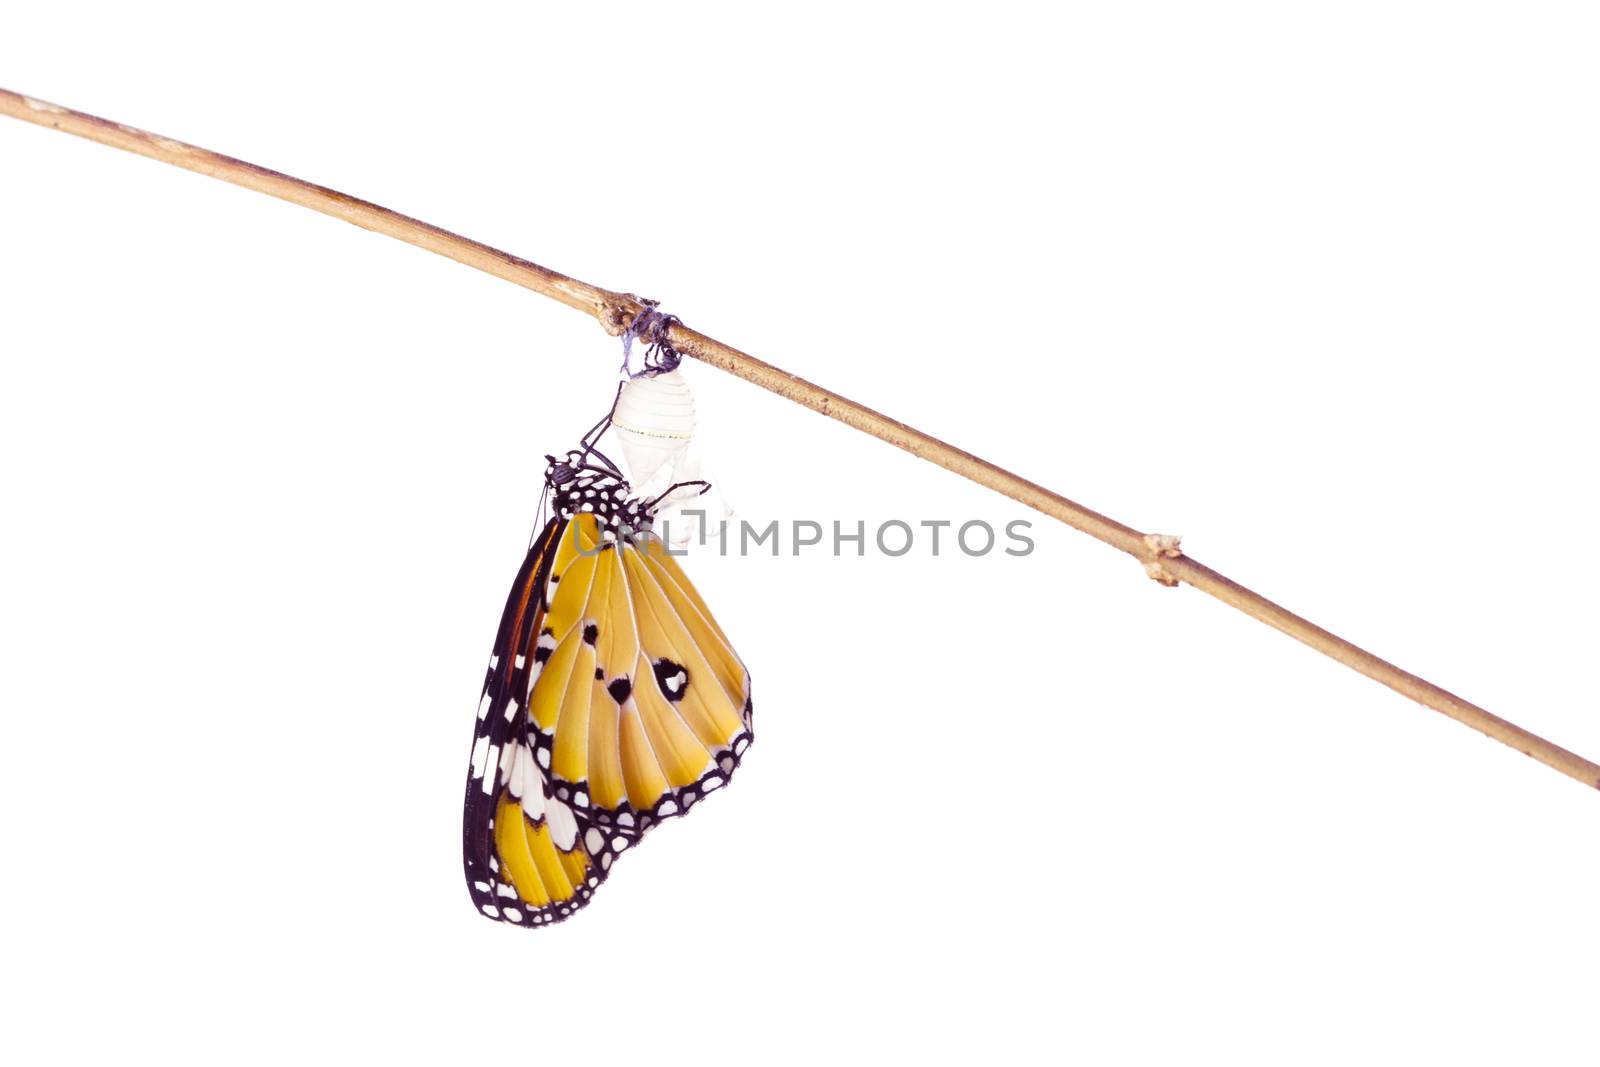 Monarch butterfly emerging from its chrysalis on white background